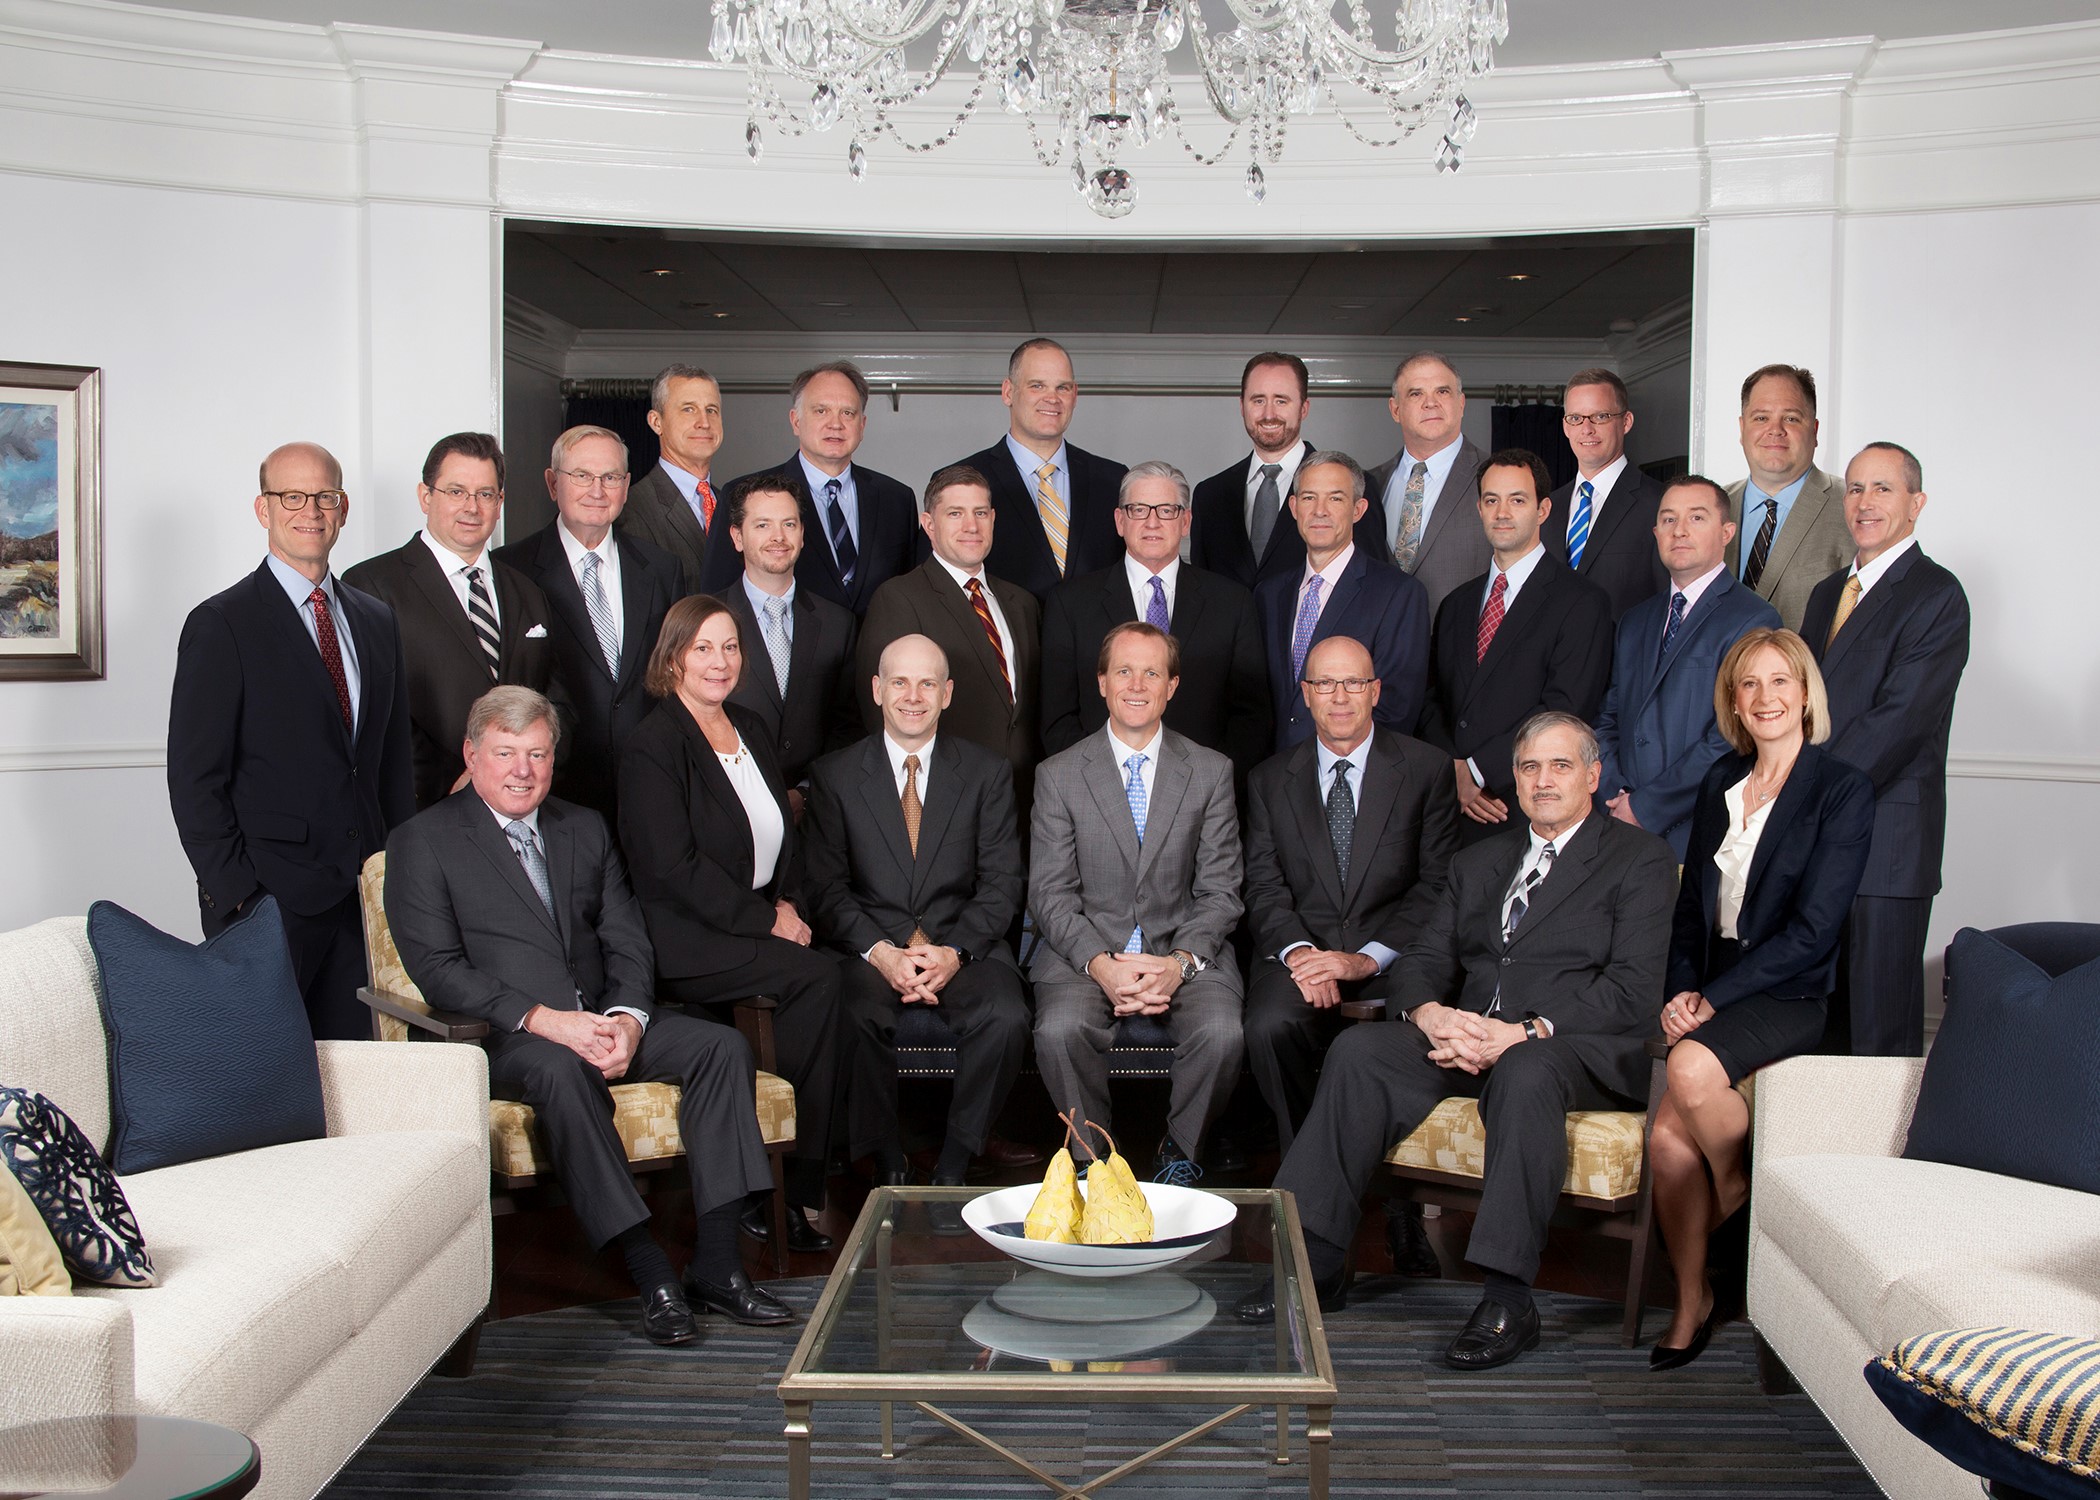 Atlantic Orthopaedic Specialists Physicians Group Photo